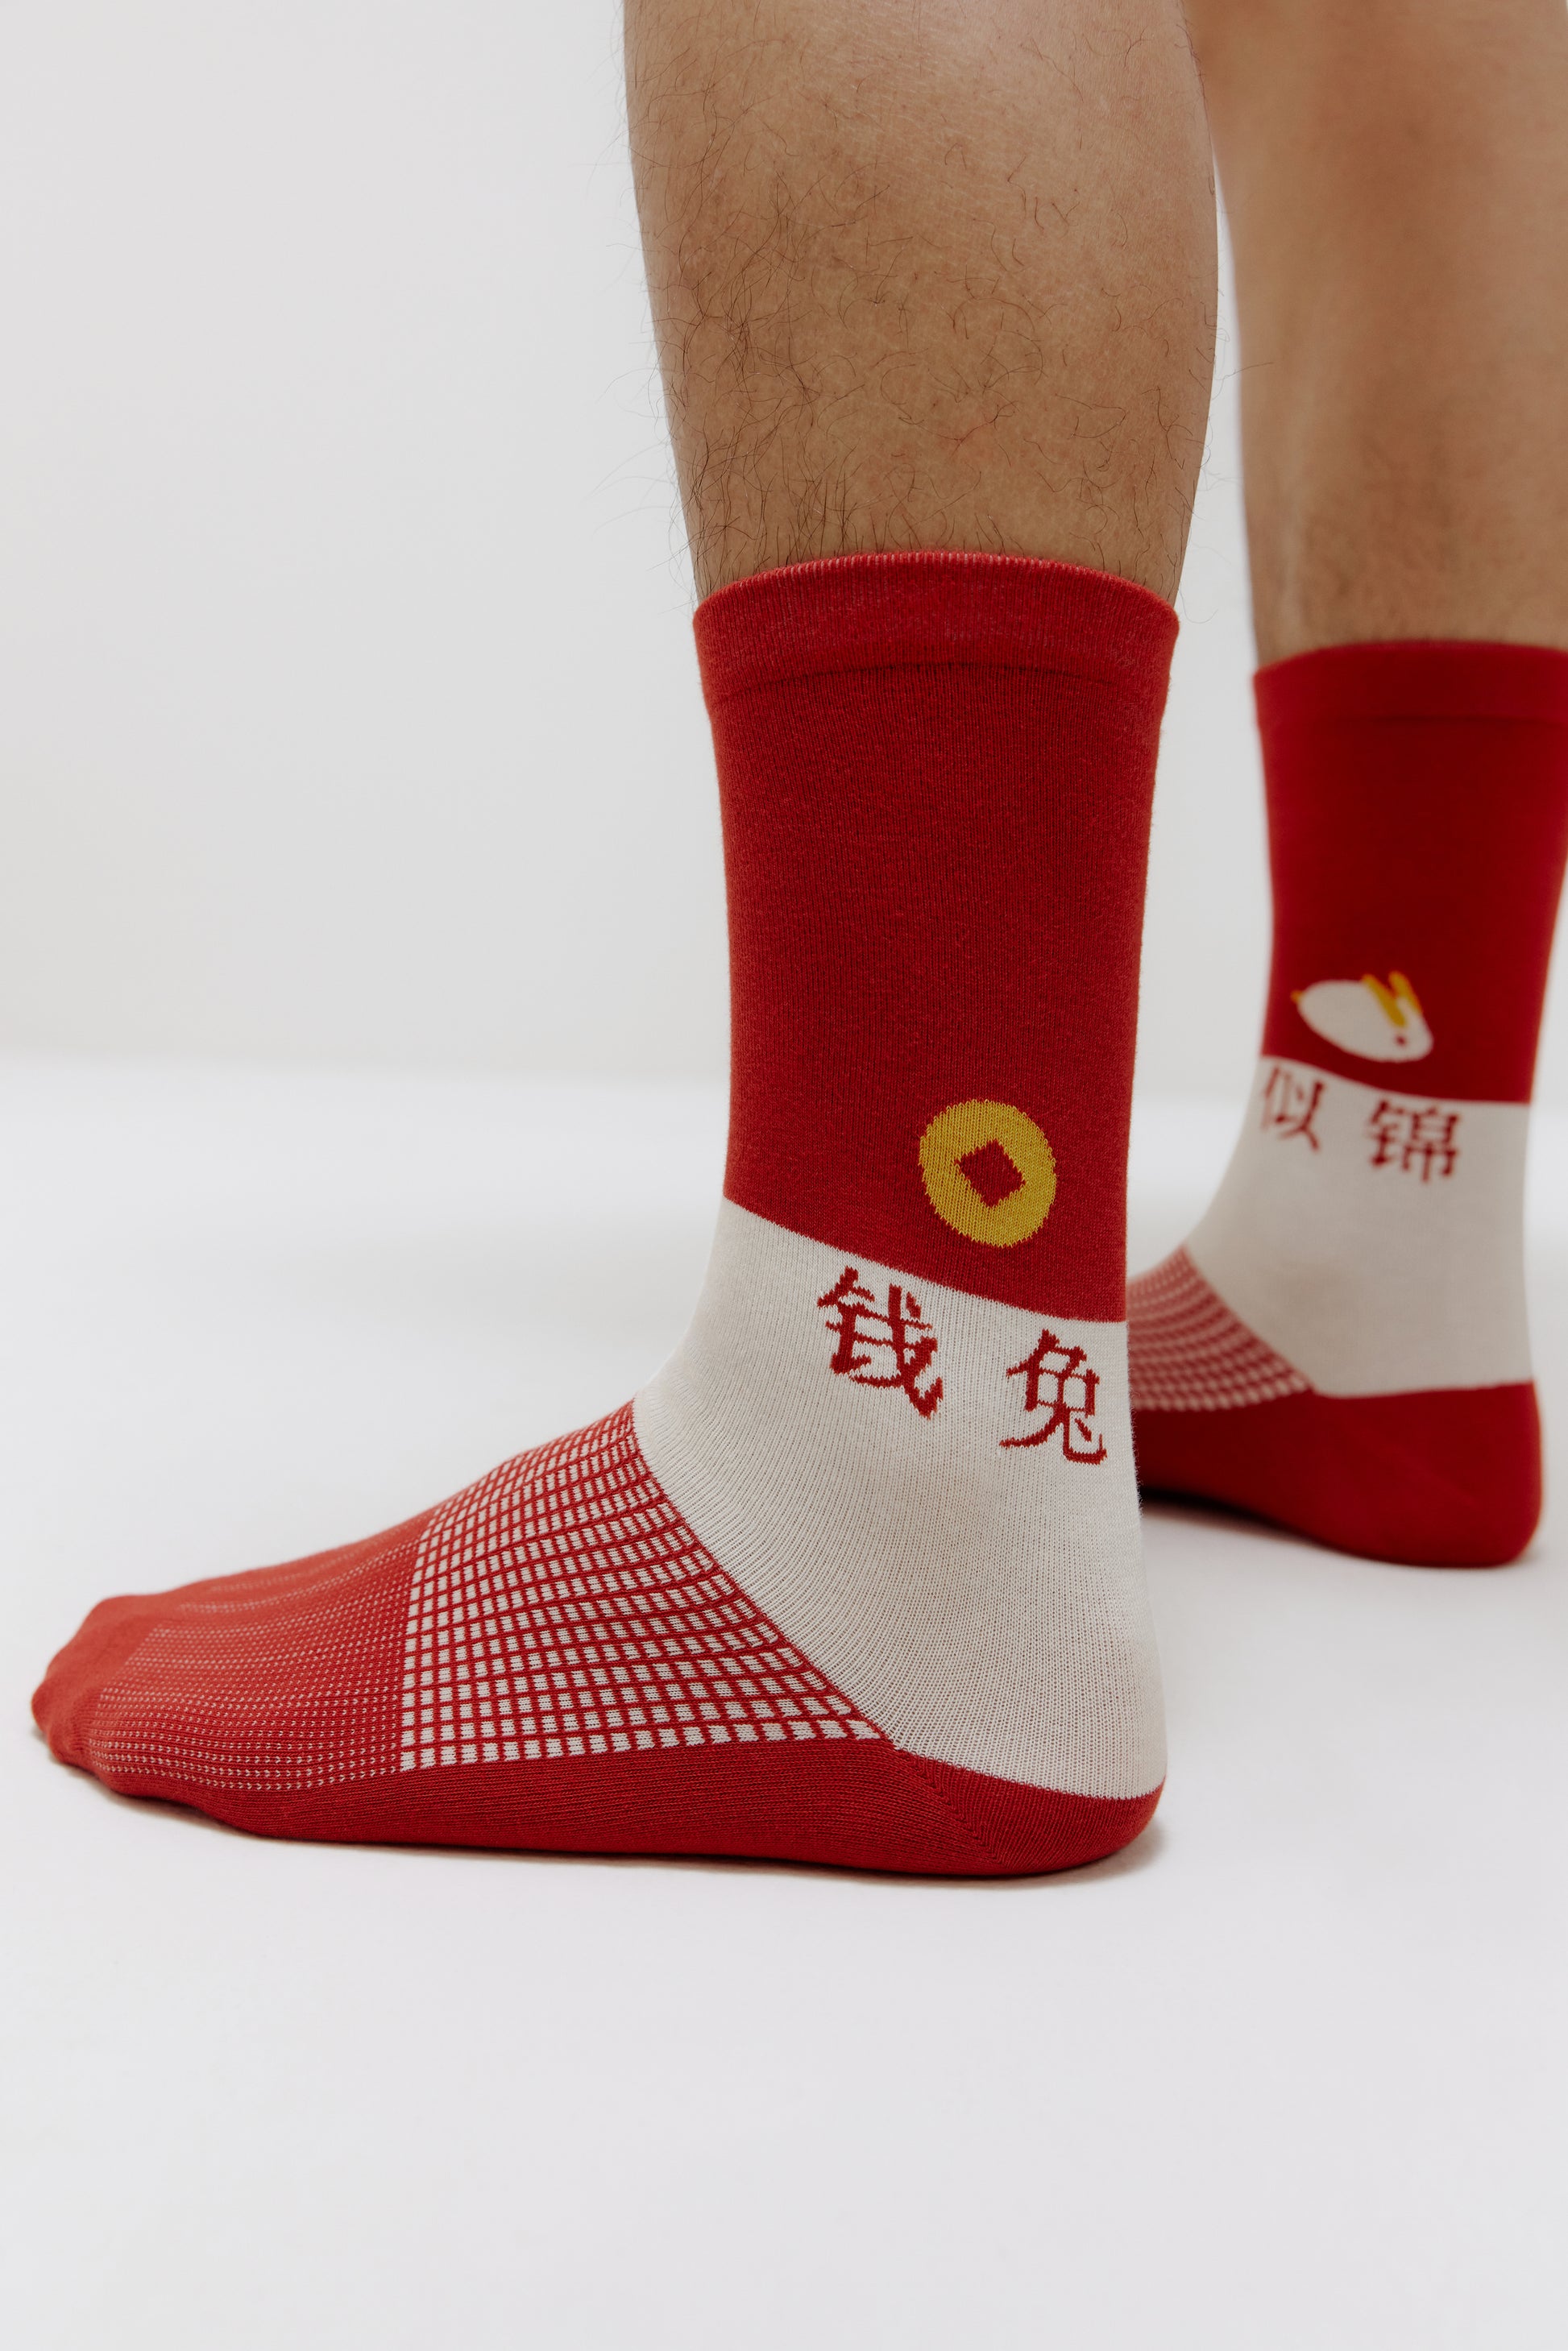 5 Paires Enfants Nouvel An Chinois Chaussettes Rouge Lucky Bunny